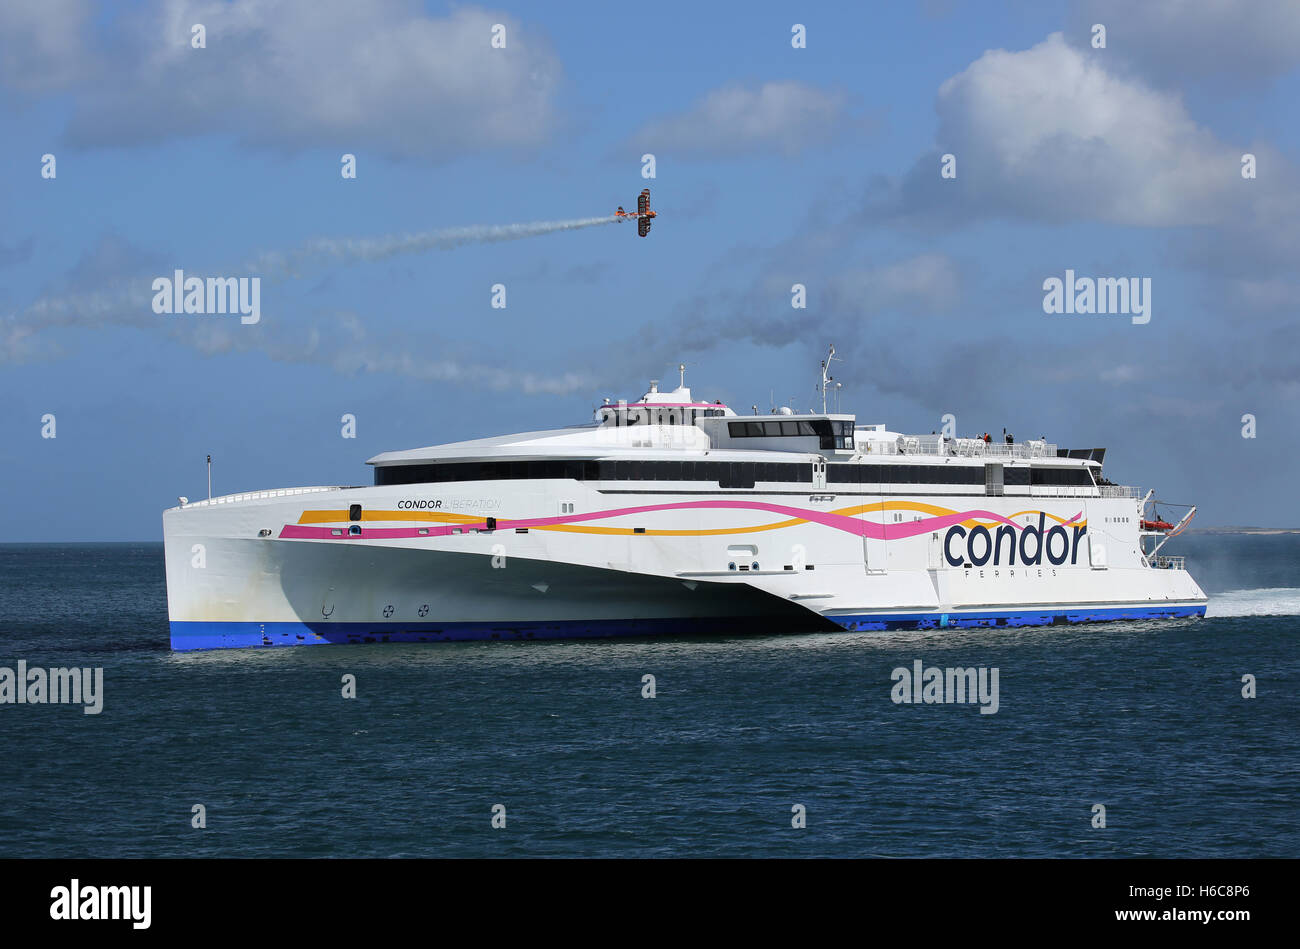 The Condor Liberation high speed car ferry slowing down as it enters St. Peter Port in Guernsey from Poole in Dorset. Stock Photo